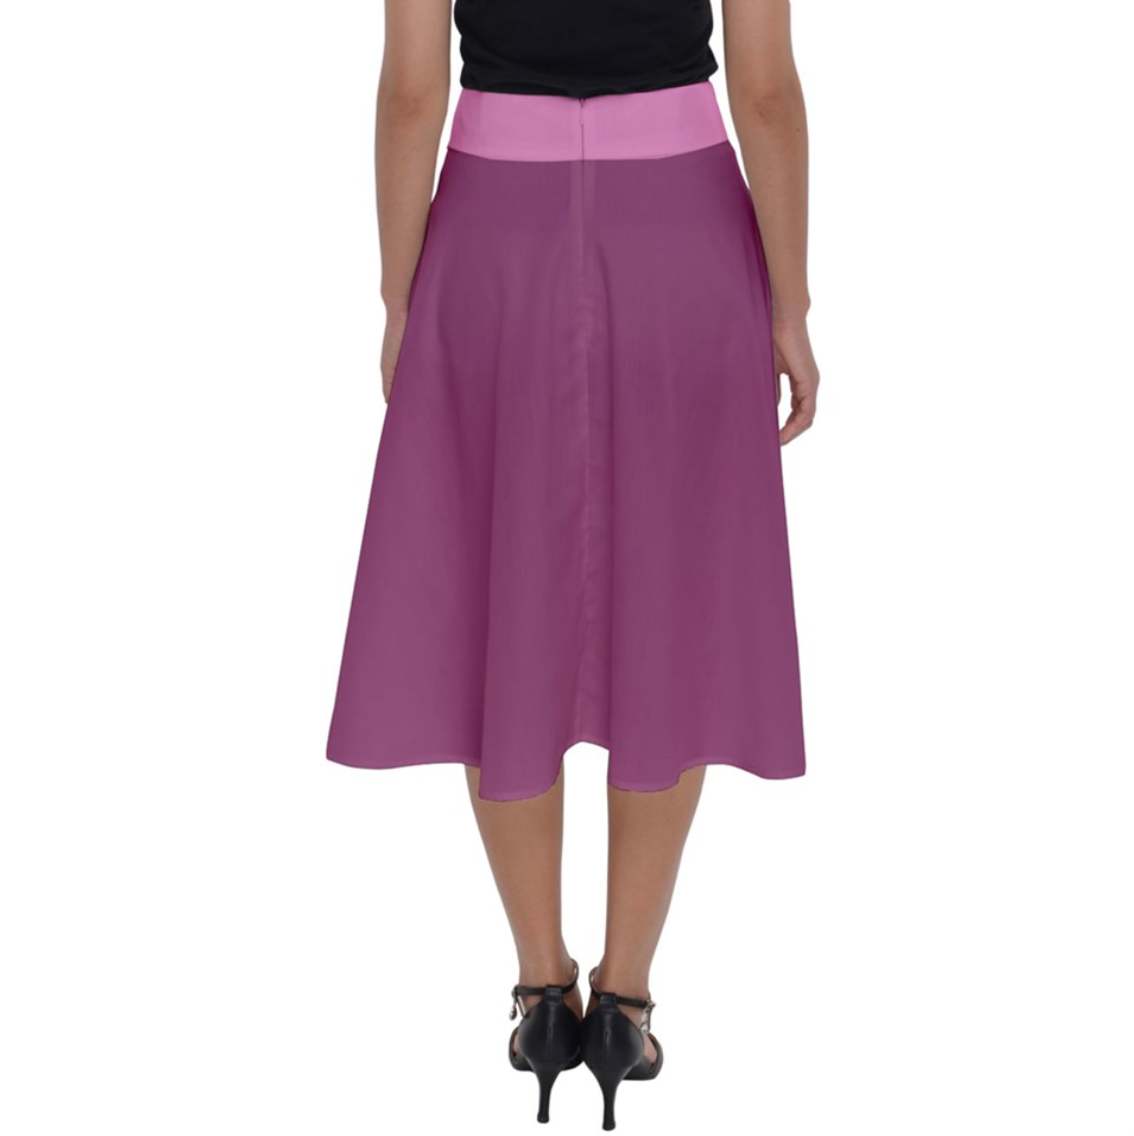 Charmed Perfect Length Midi Skirt (Pink Solid Colored)